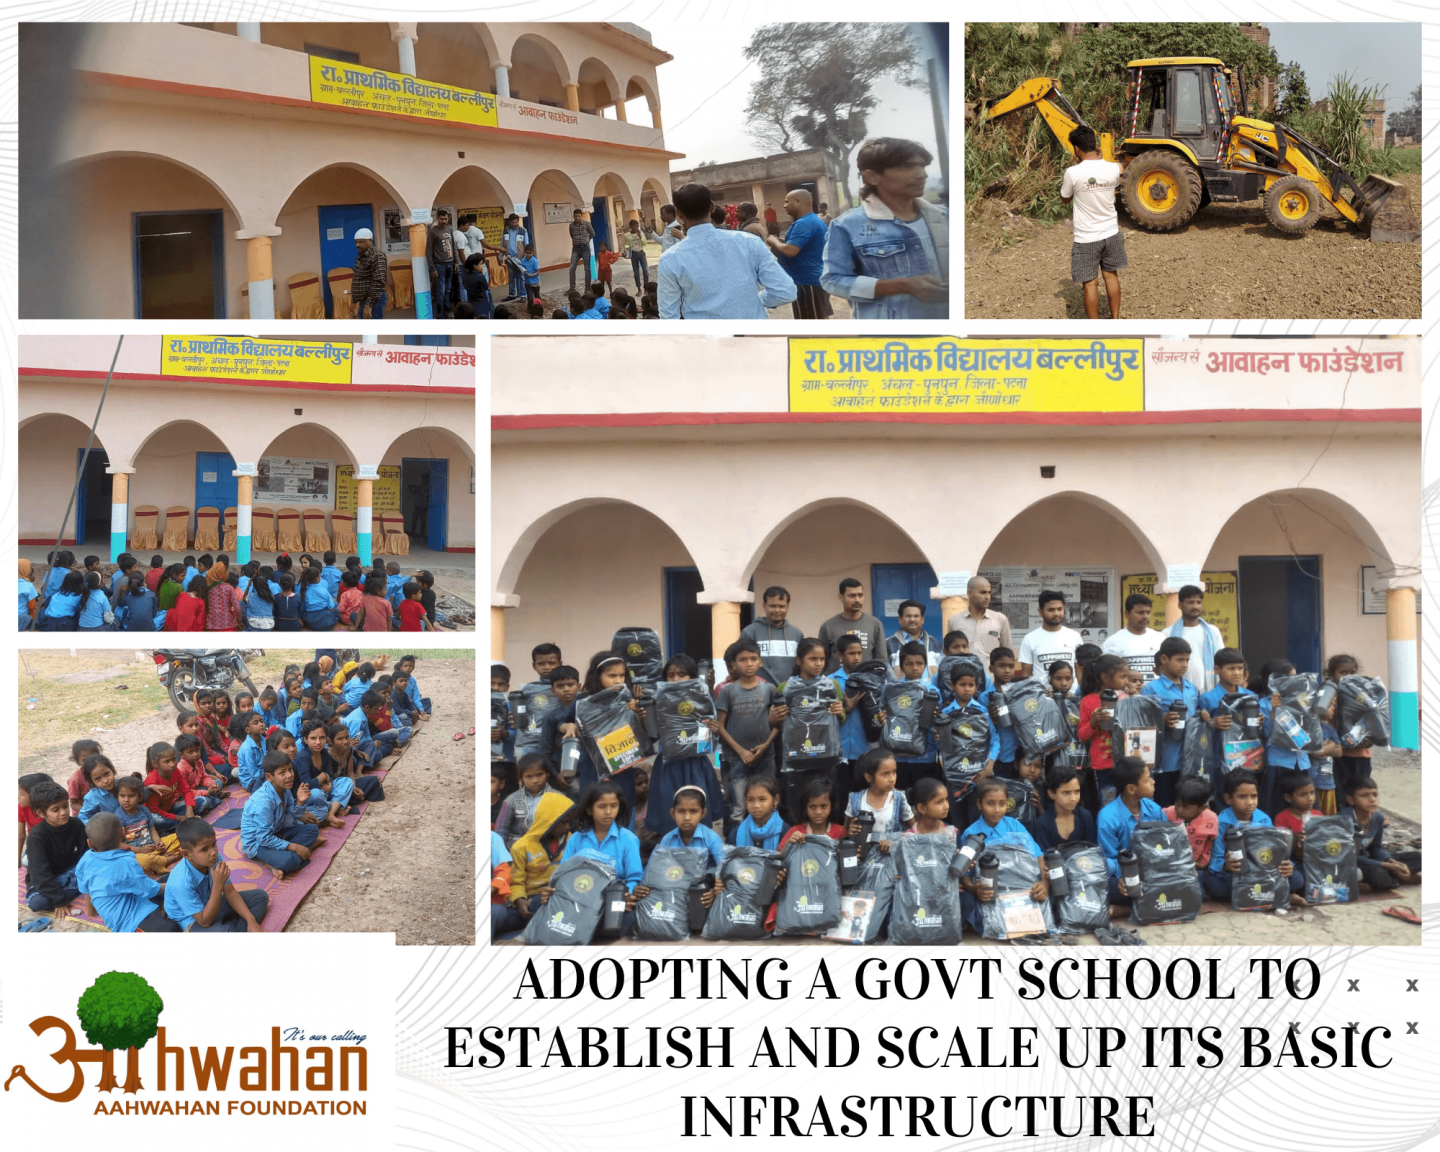 ADOPTING A PUBLIC SCHOOL TO ESTABLISH AND SCALE UP ITS BASIC INFRASTRUCTURE